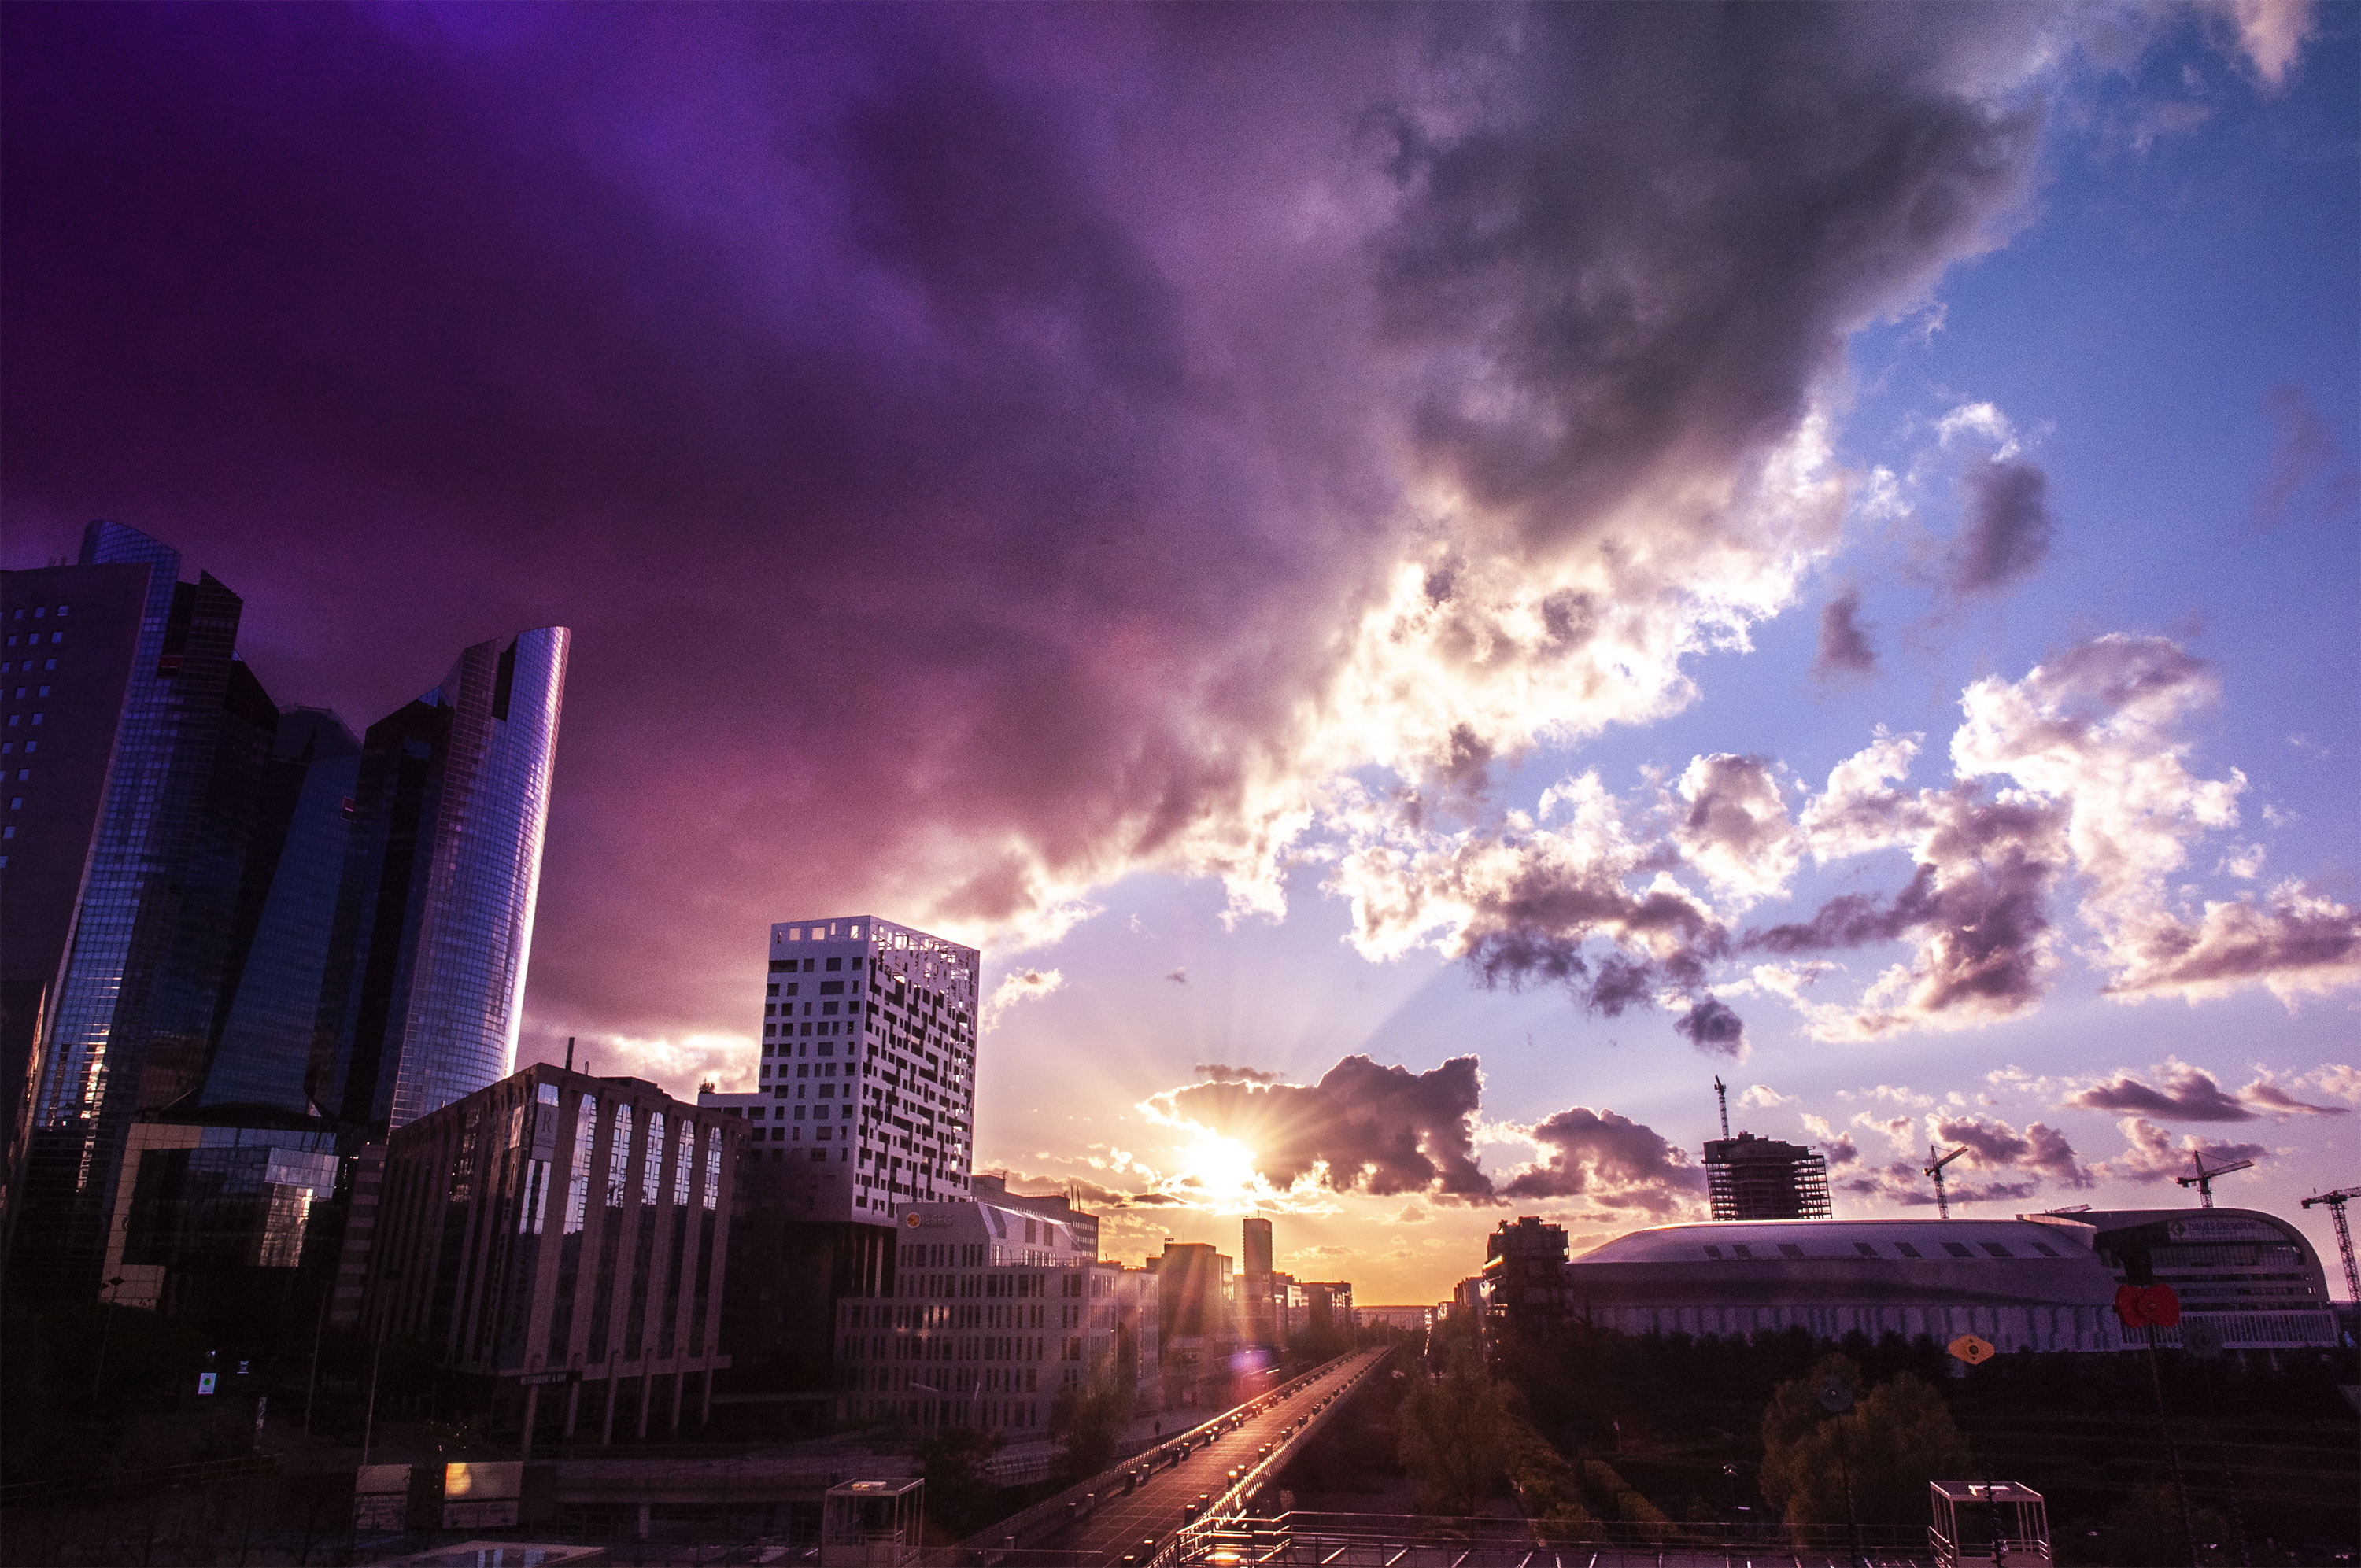 Nanterre La Defense under stormi sky and clouds by sunset ray light, (Nos Dren).